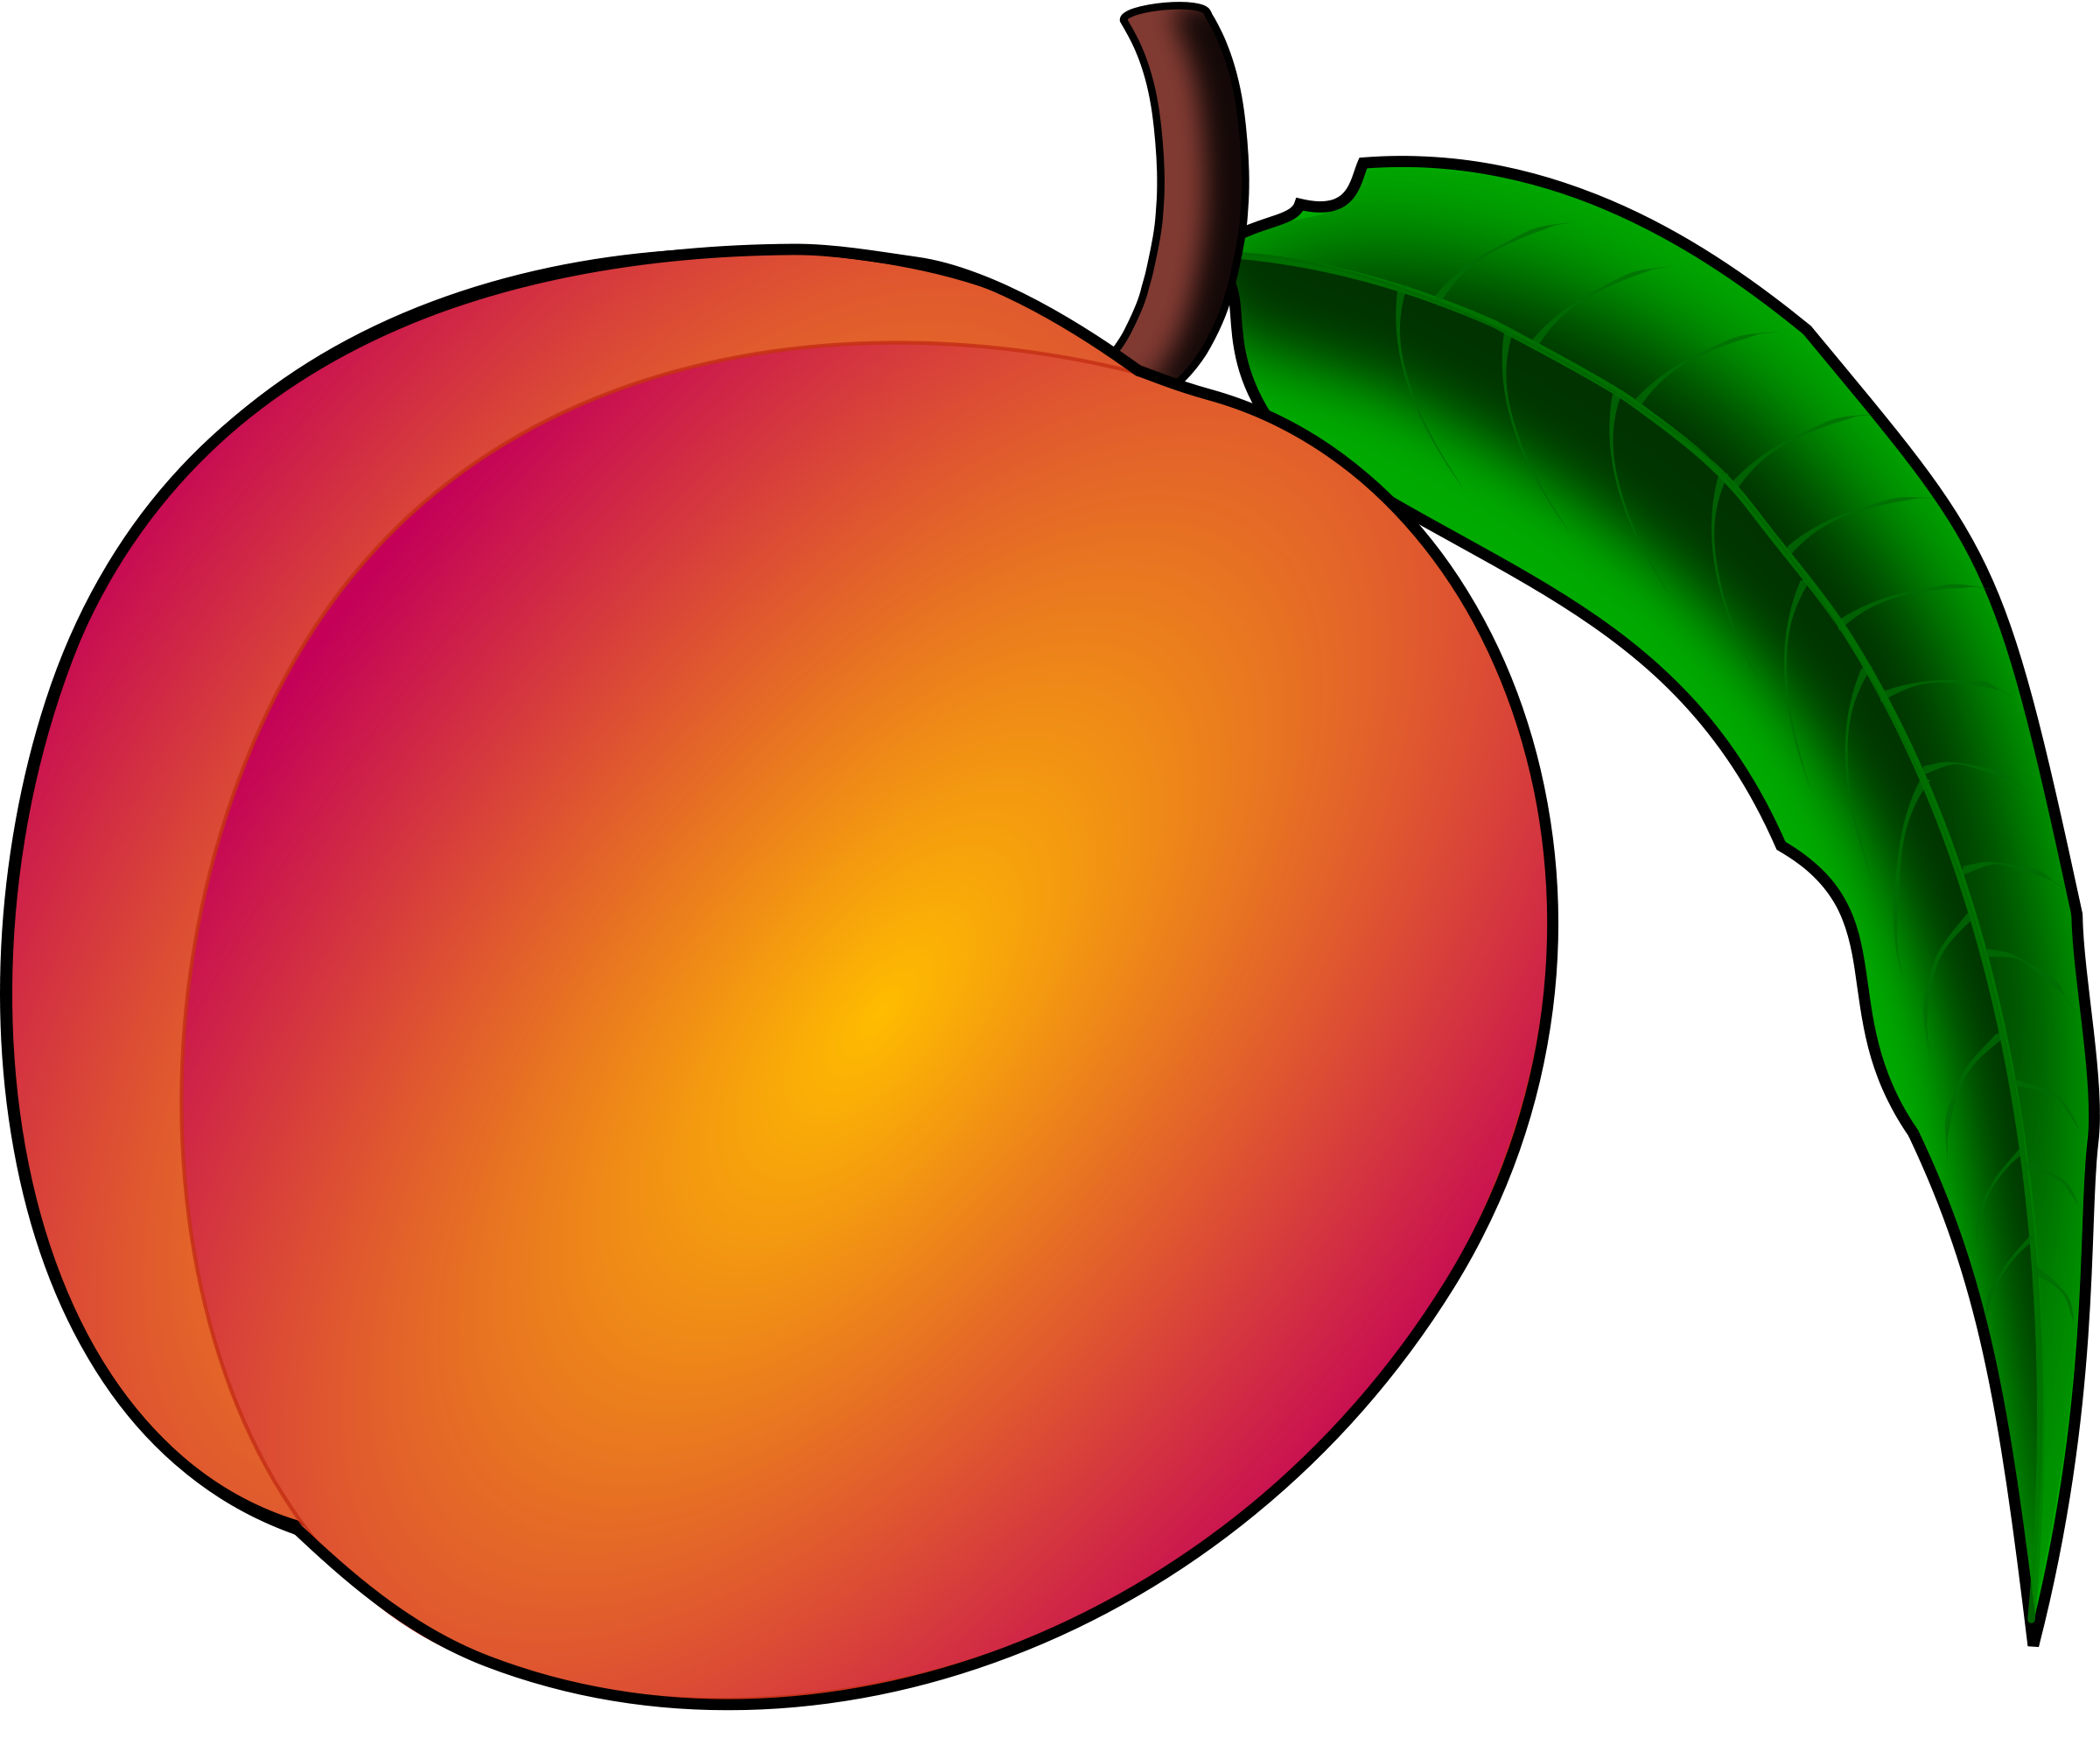 Large Peaches Clipart Image 31429